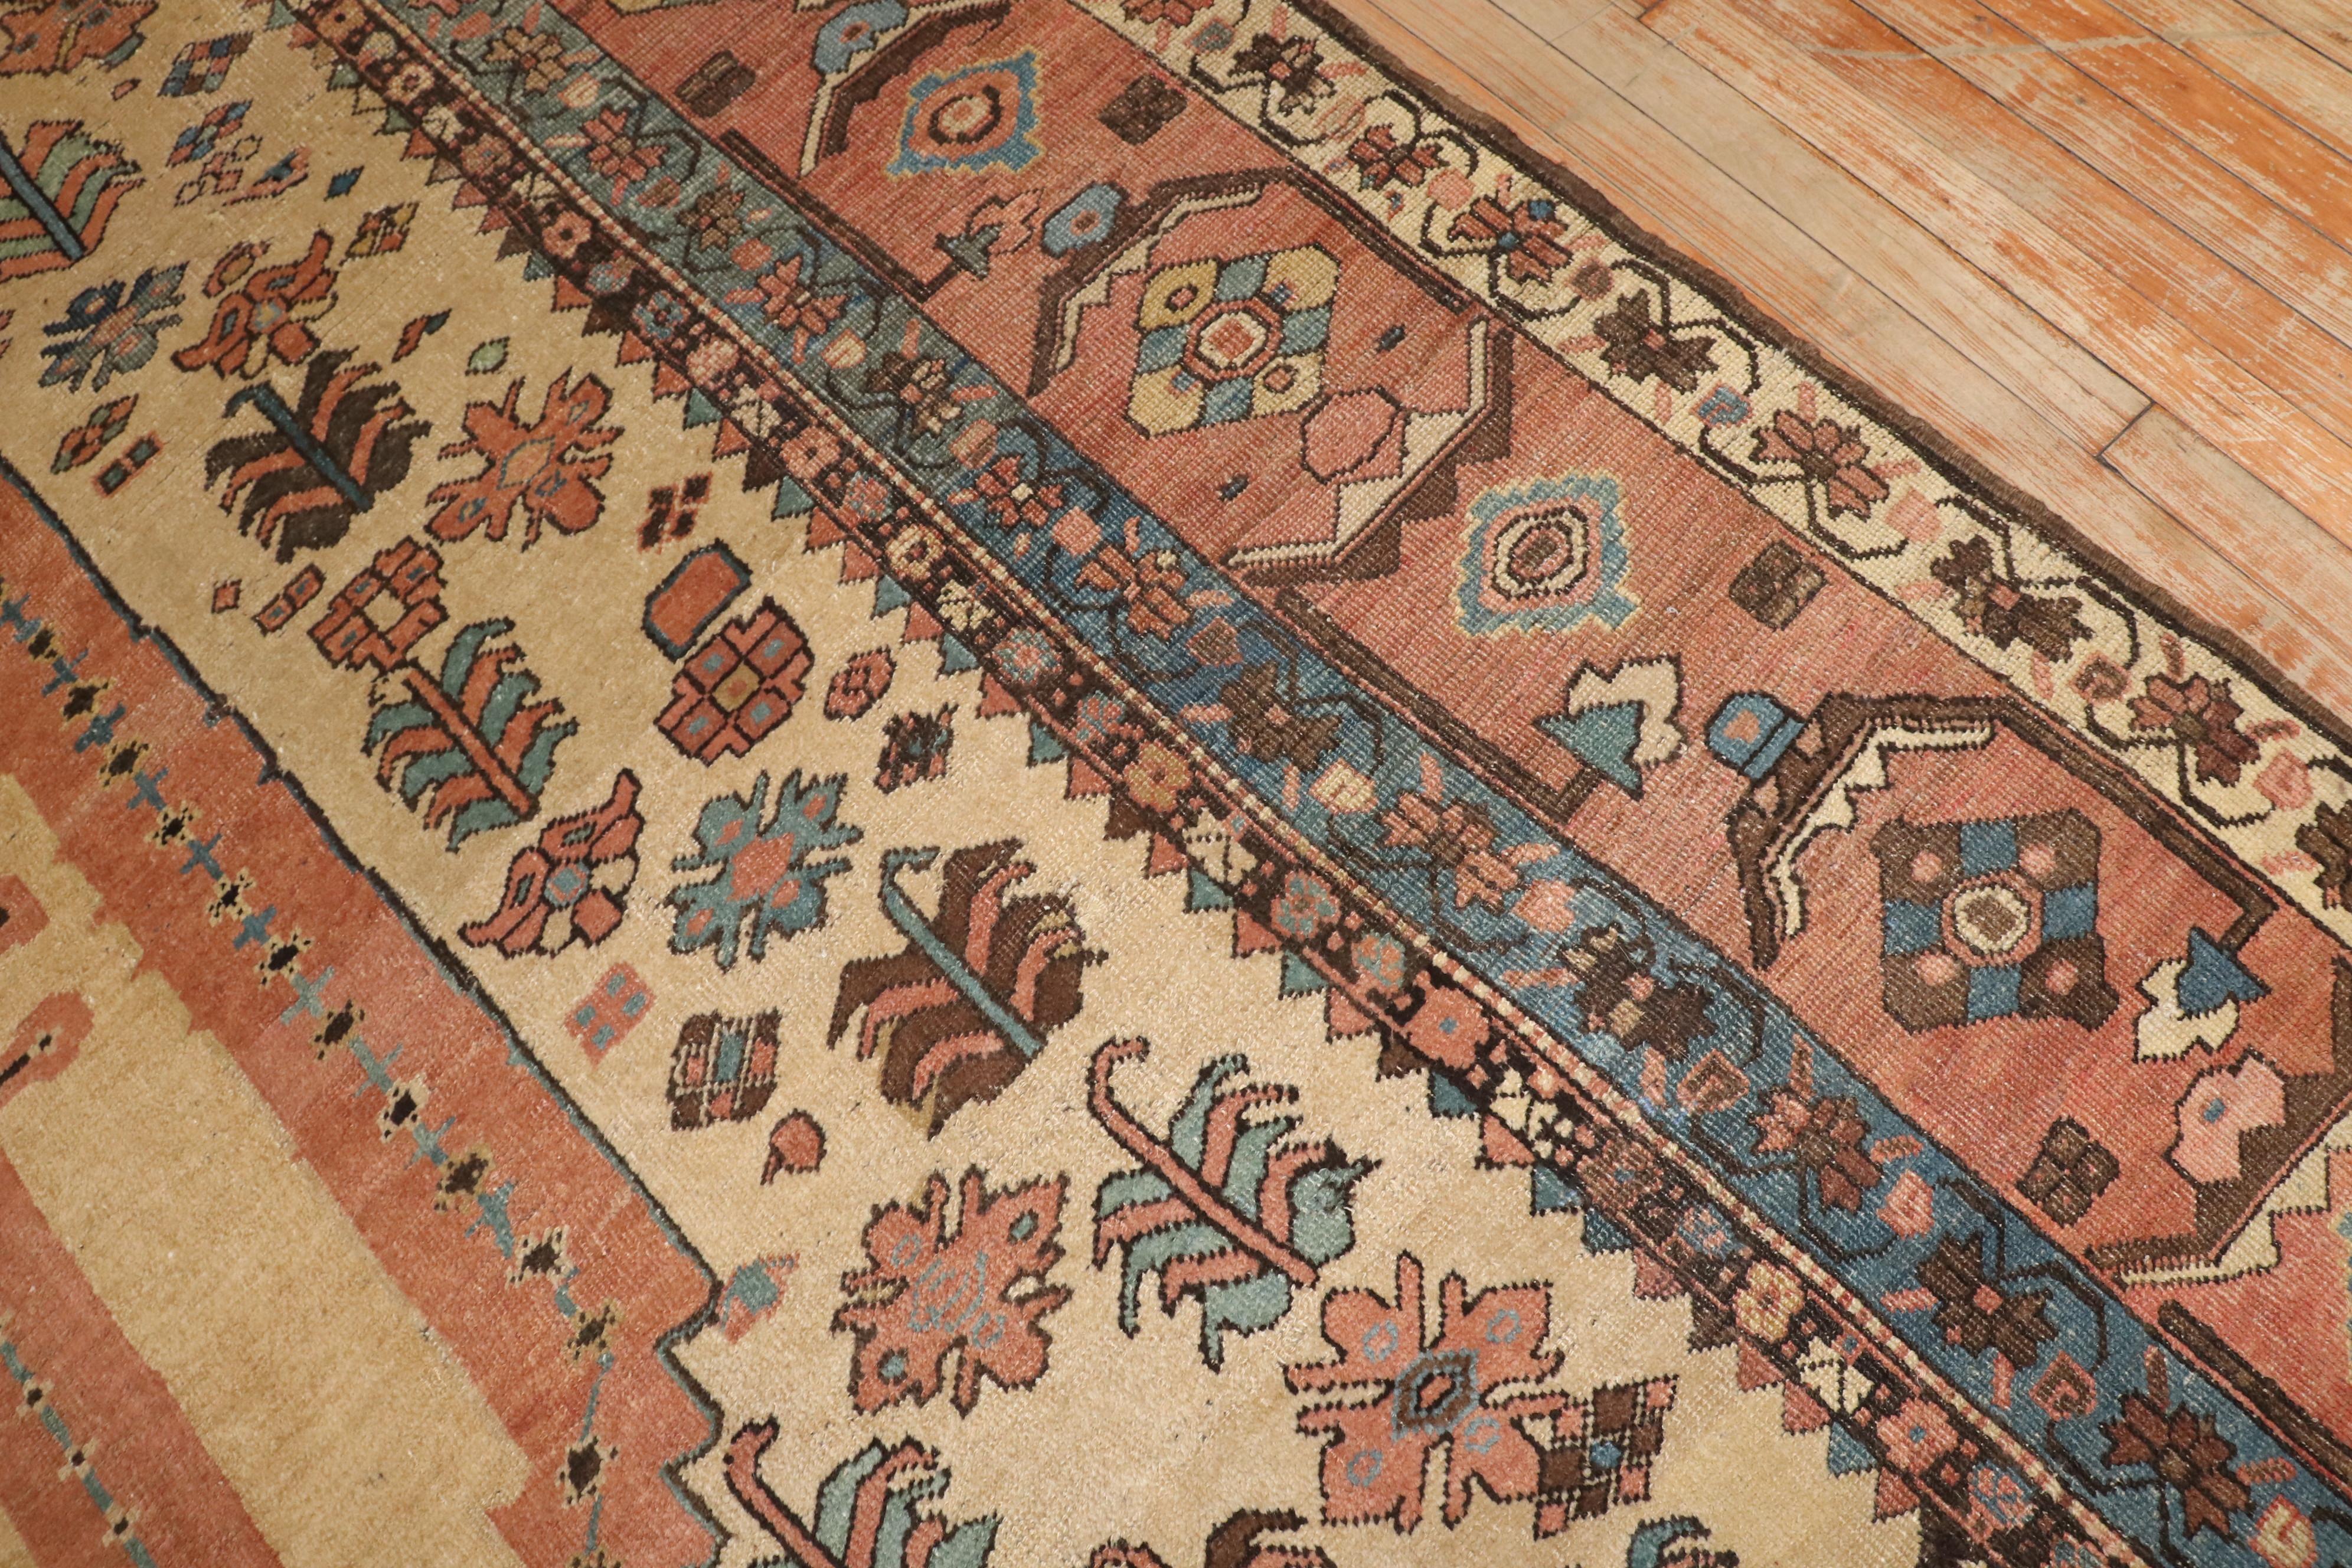 Zabihi Collection Decorative Antique Persian Bakshaish Rug In Good Condition For Sale In New York, NY